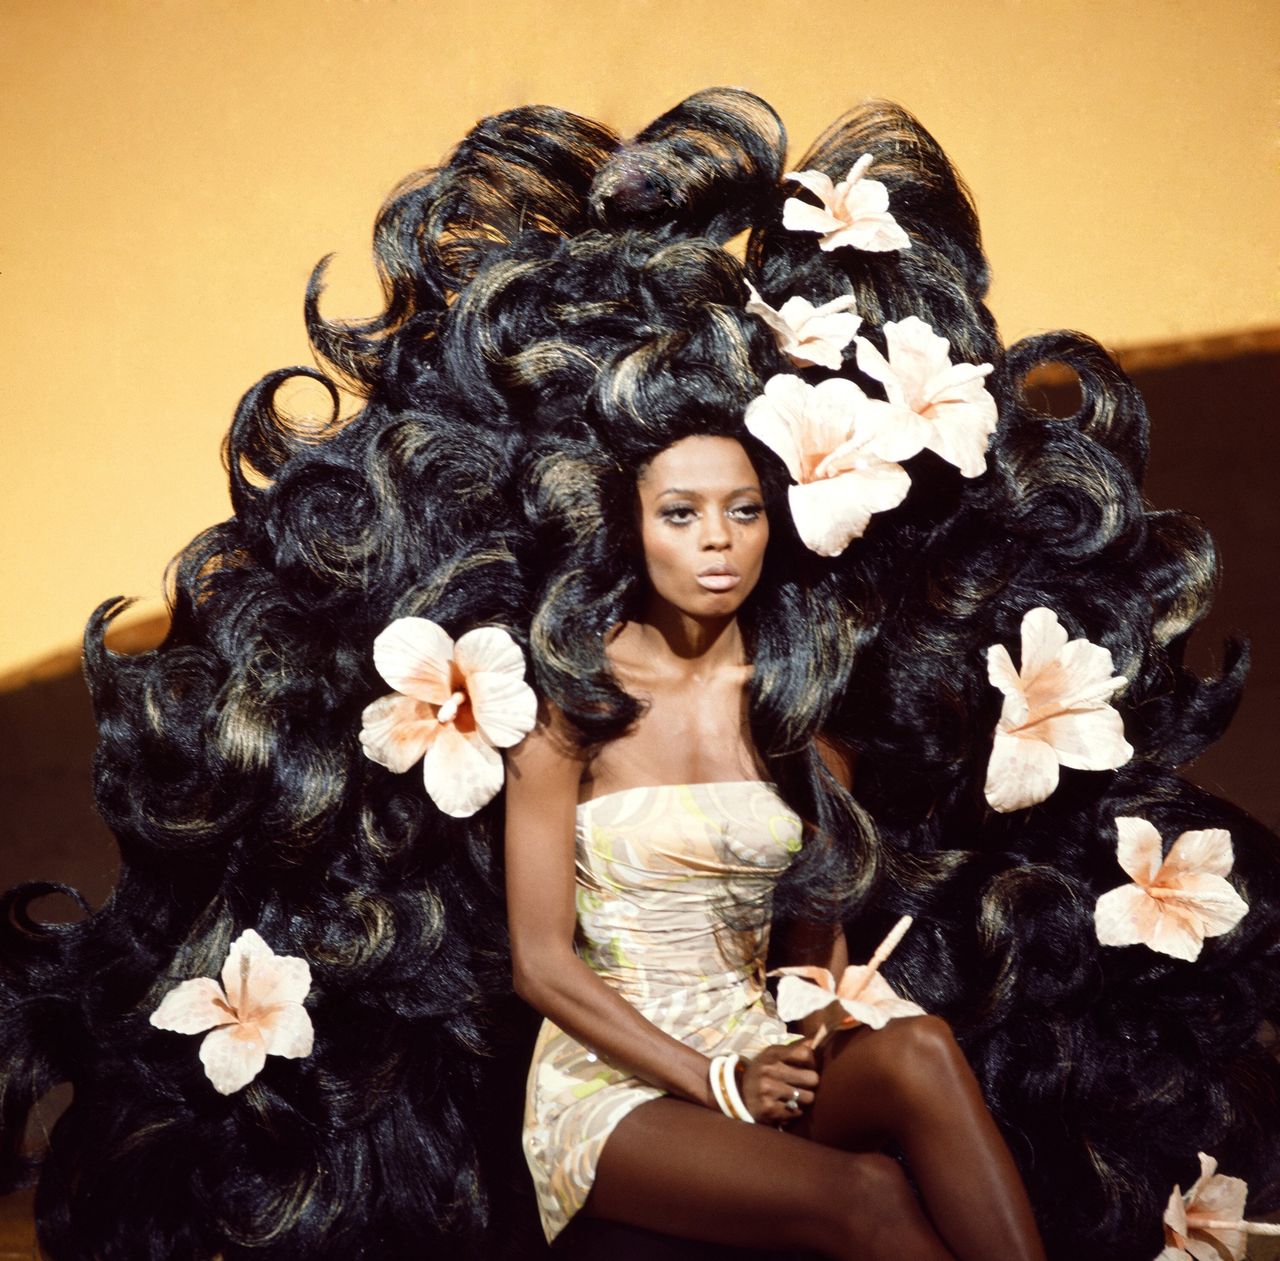 Diana Ross of The Supremes on Broadway's "G.I.T. (Gettin’ It Together),” which aired on Nov. 12, 1969.